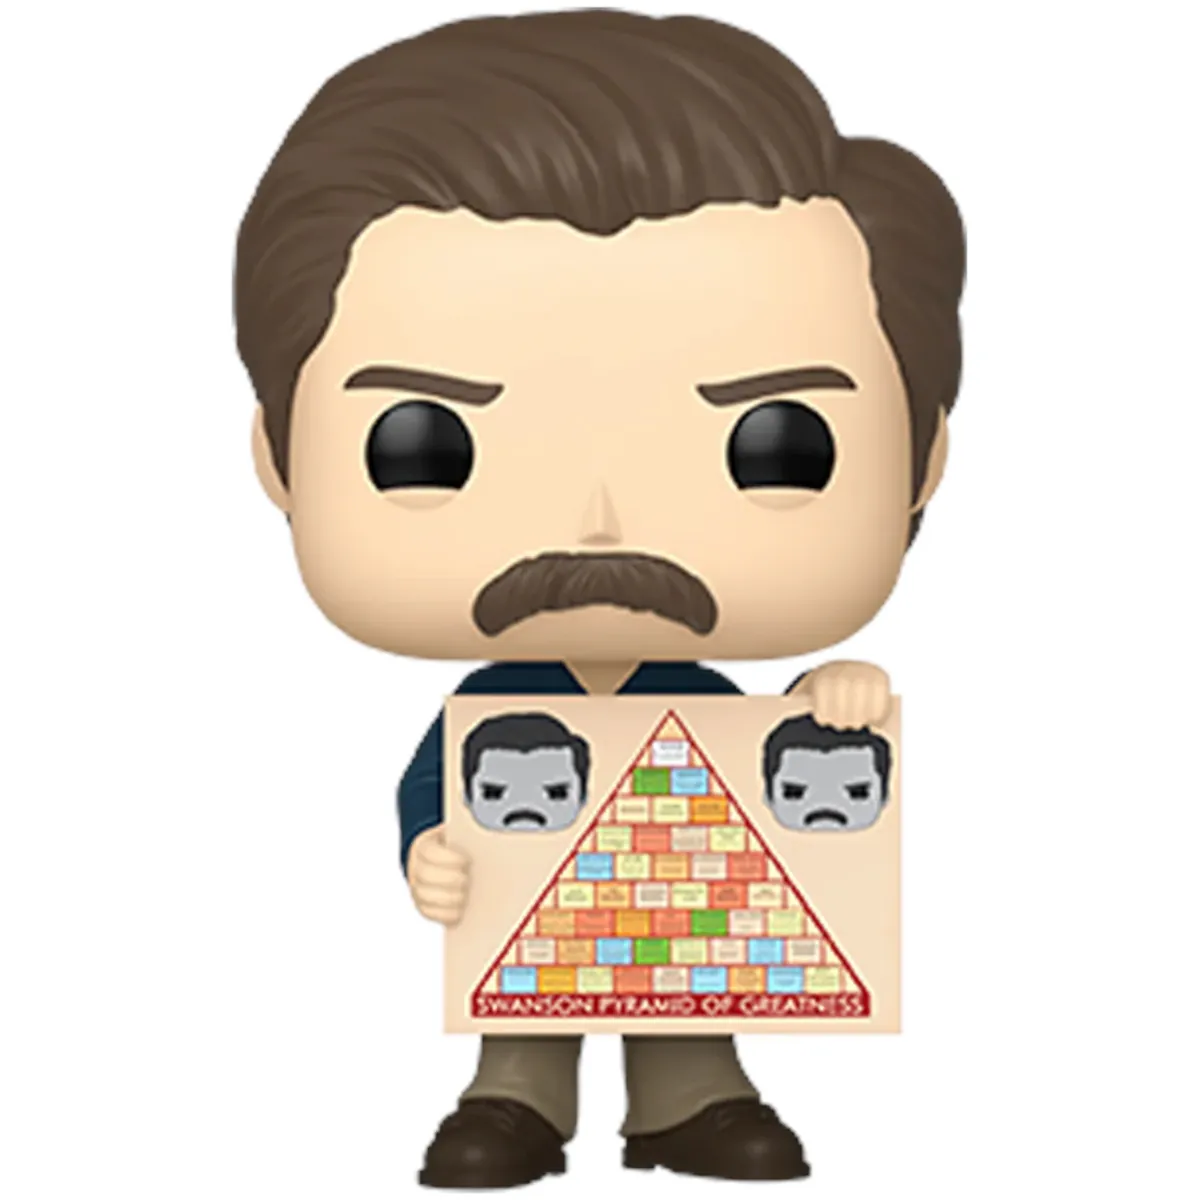 80175 Funko Pop! Television - Parks And Recreation - Ron Swanson (With Pyramid of Greatness) Collectable Vinyl Figure